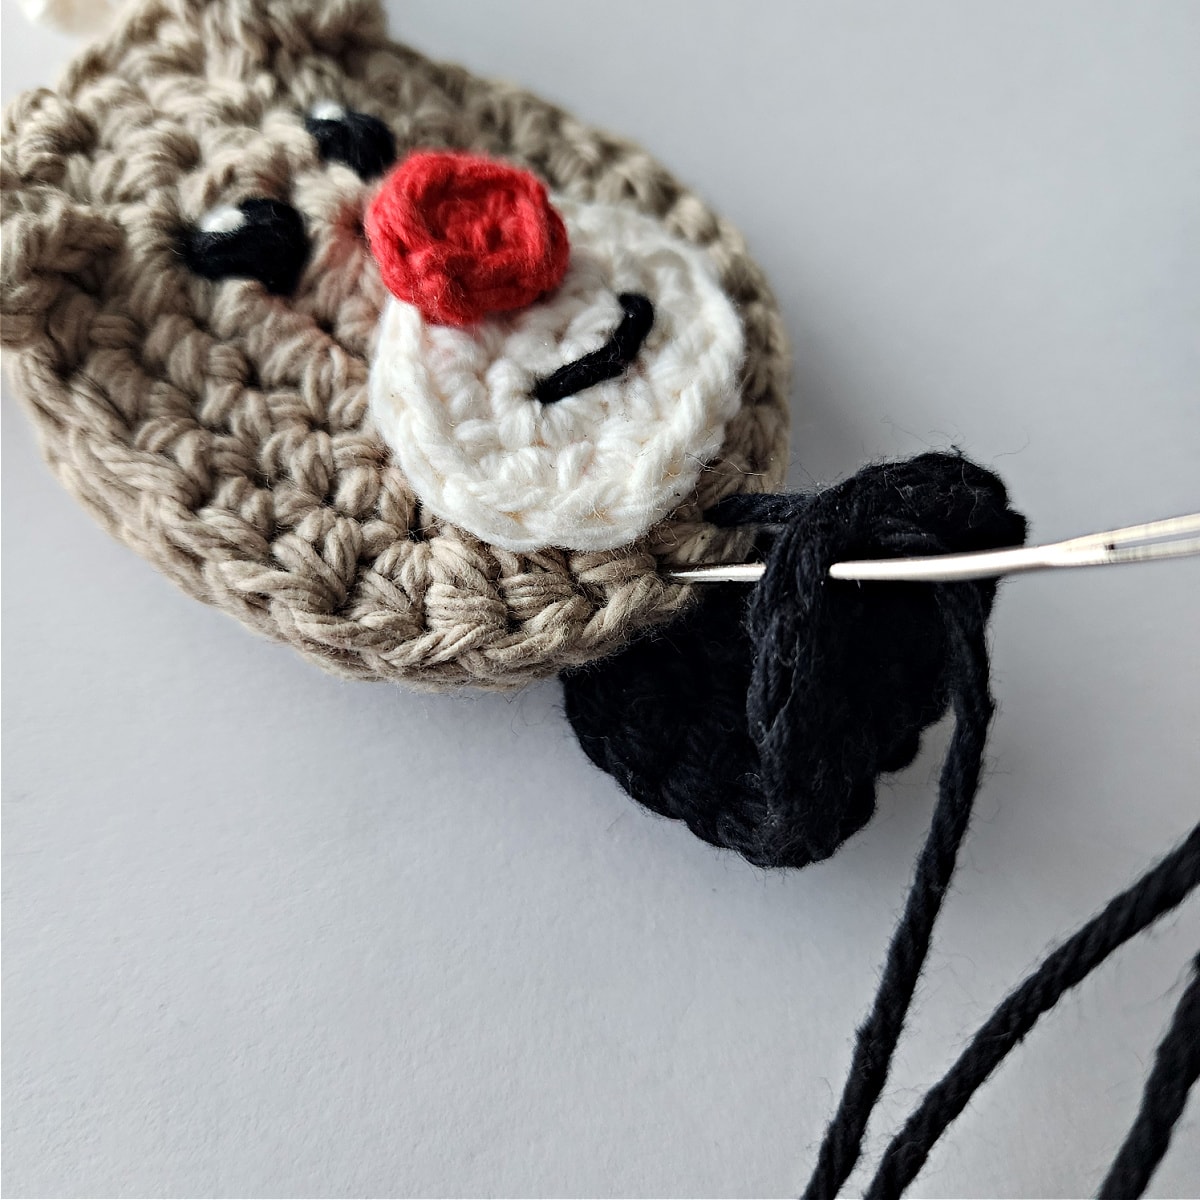 crochet reindeer candy cane holder ornament tutorial for attaching hooves